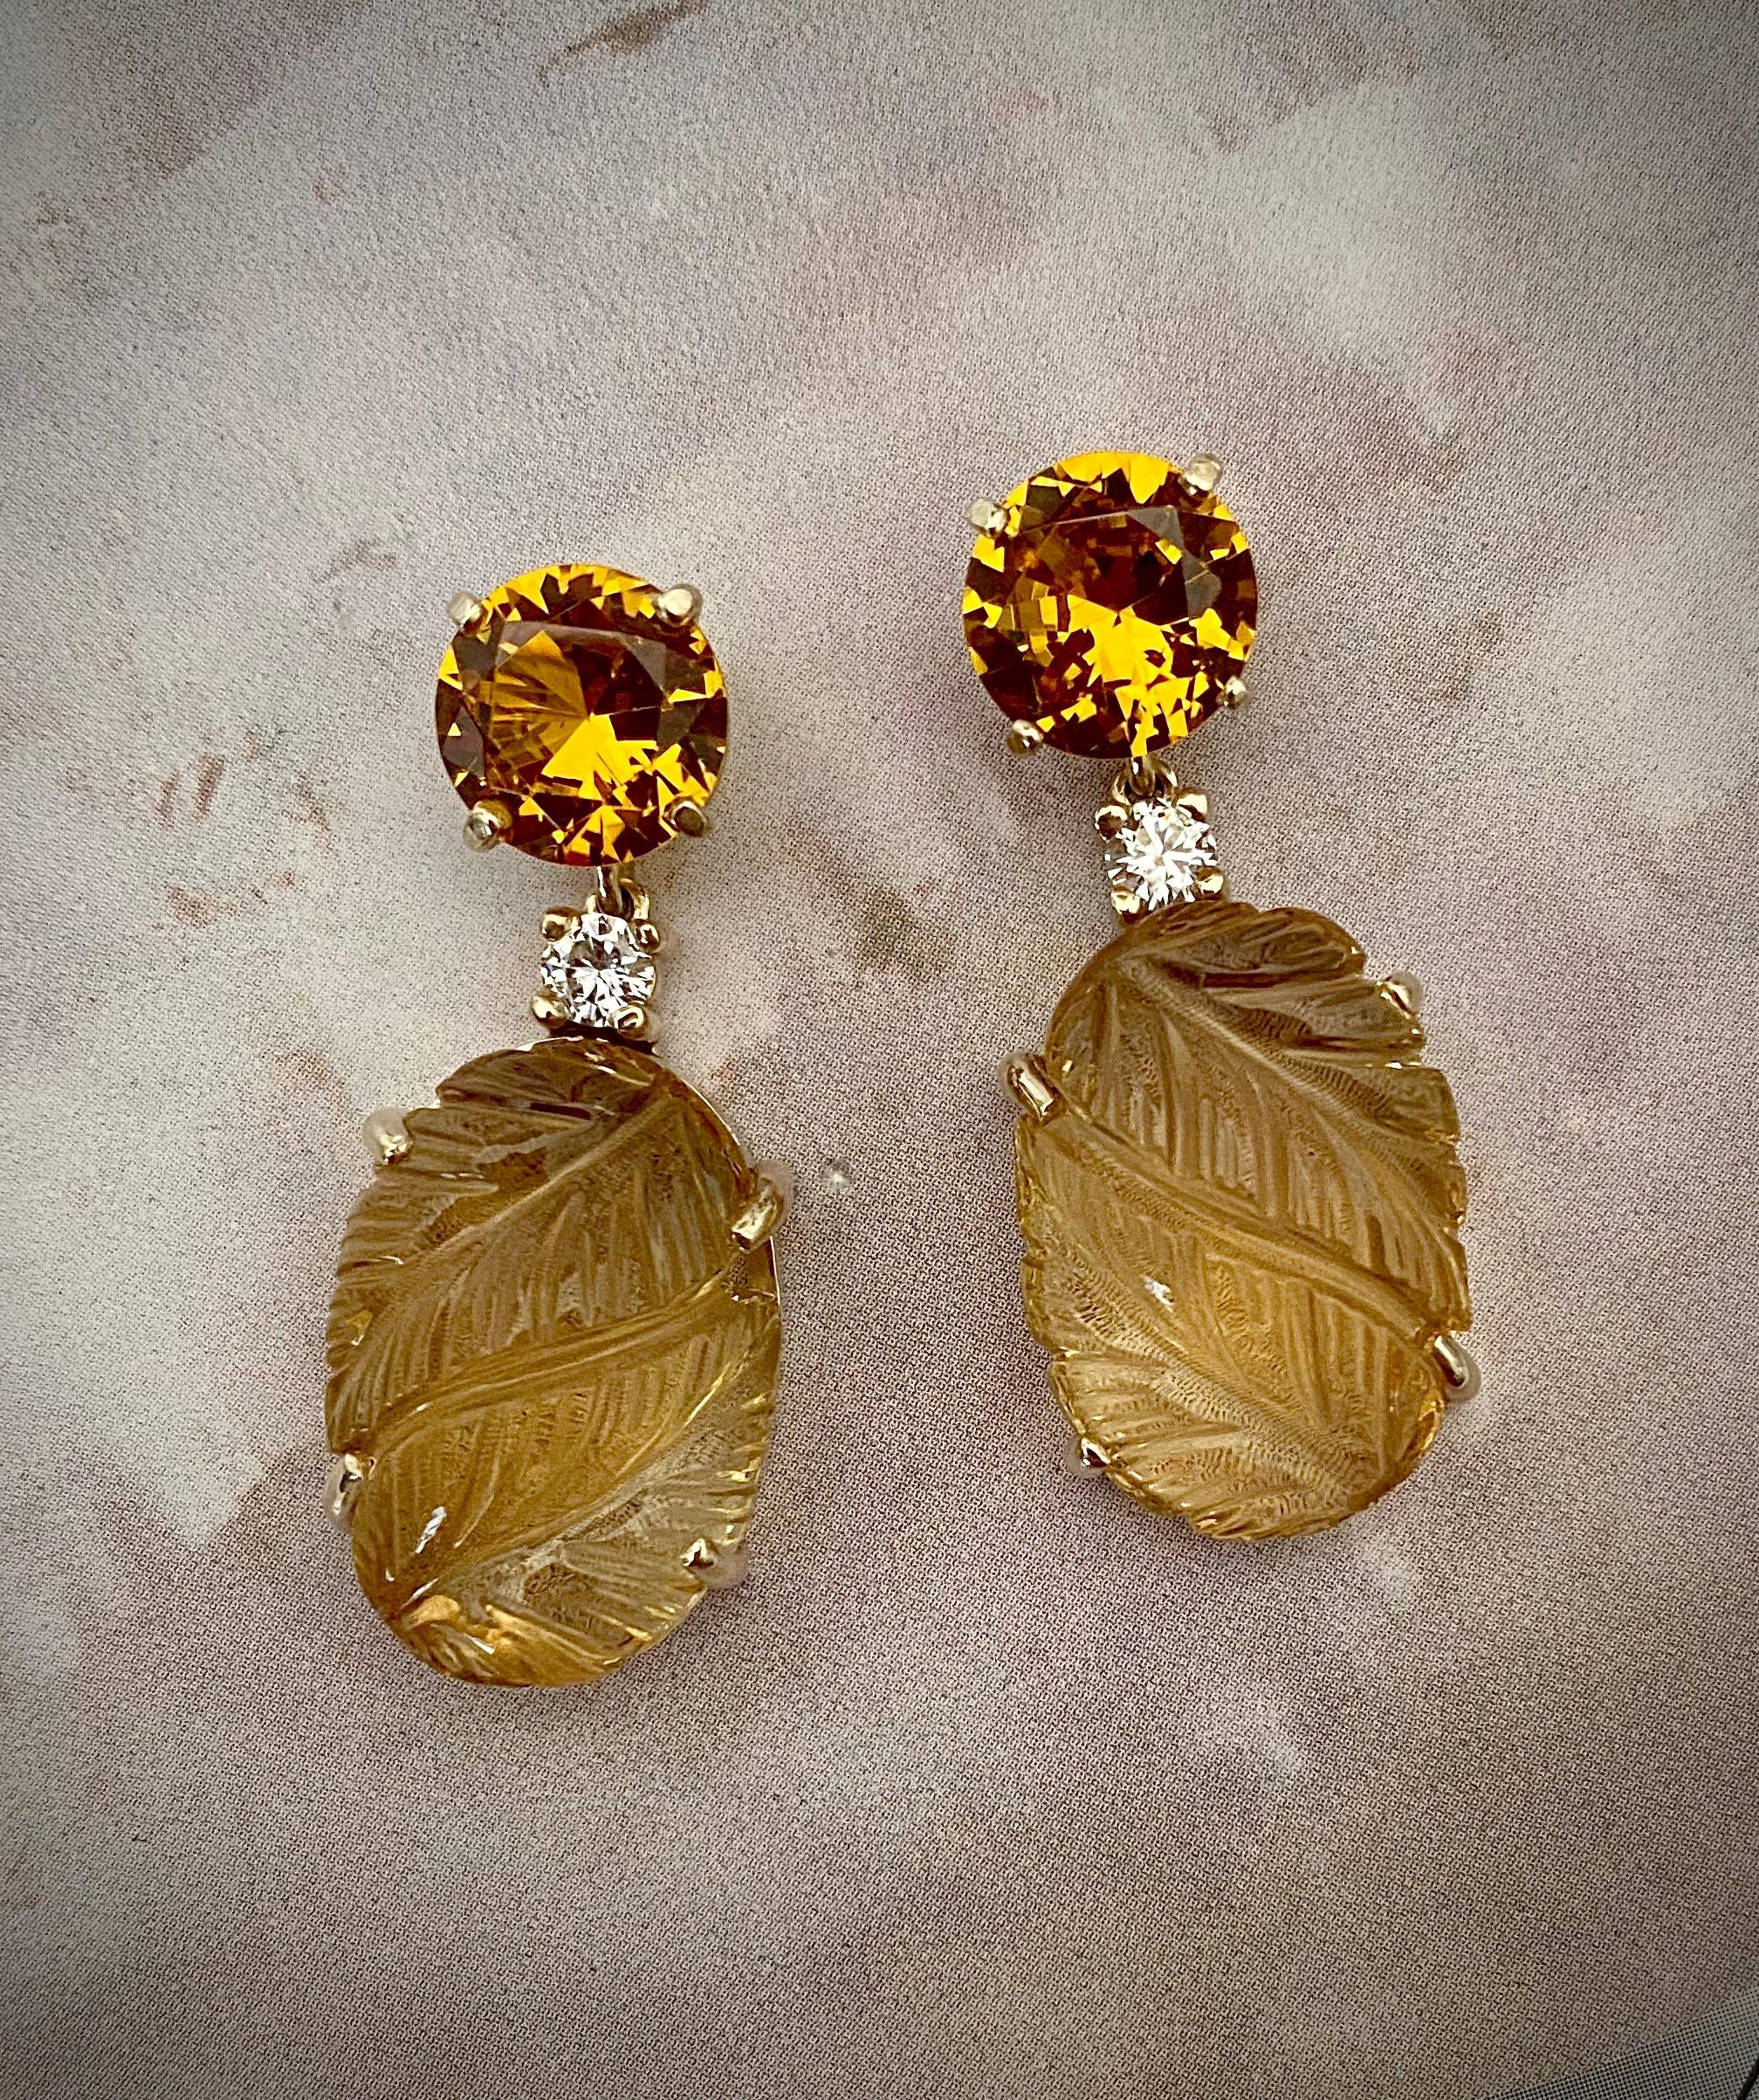 Citrine and diamonds are presented in these one of a kind dangle earrings.  The citrine cabochon pendants are exceptionally carved in faraway India in a yin yang leaf design.  The gems are complimented by dazzling brilliant cut citrines (origin: